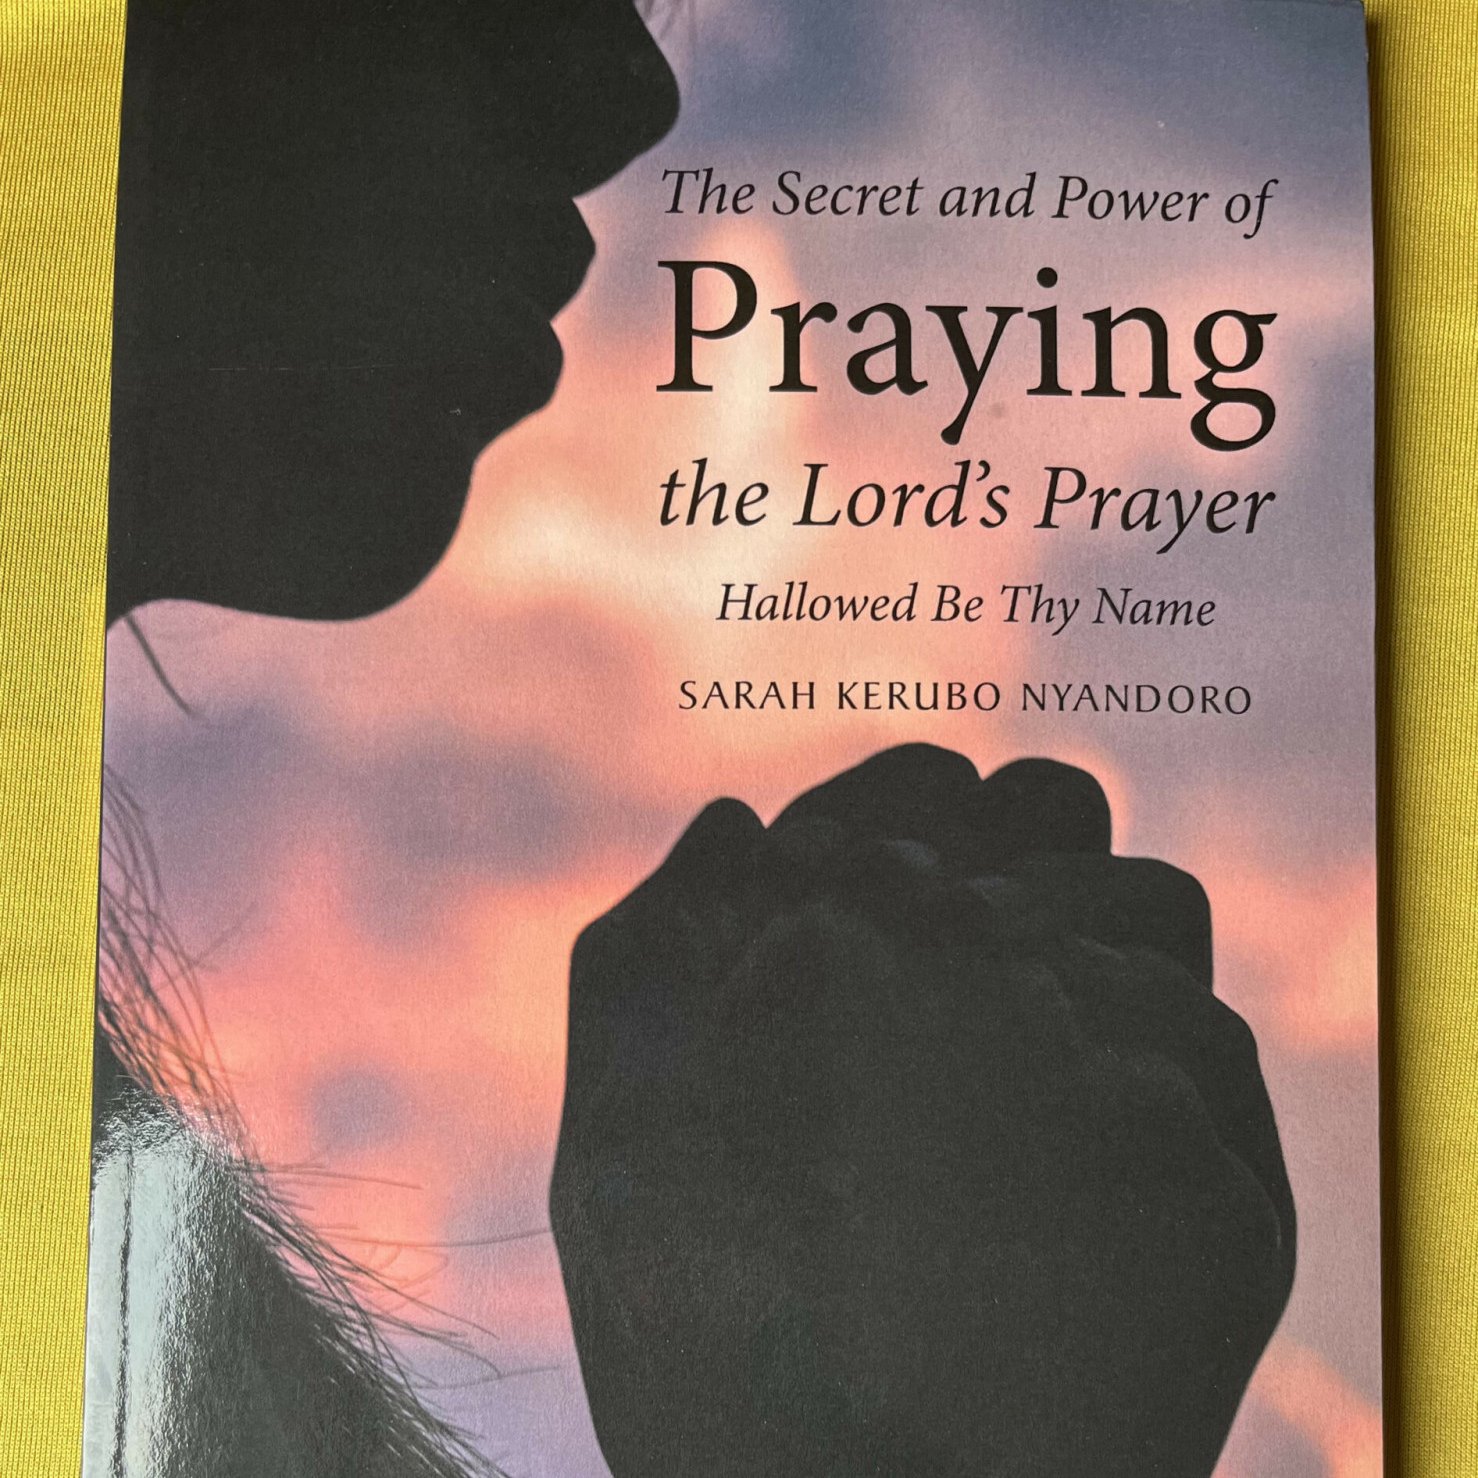 The Secret and Power of Praying the Lord's Prayer